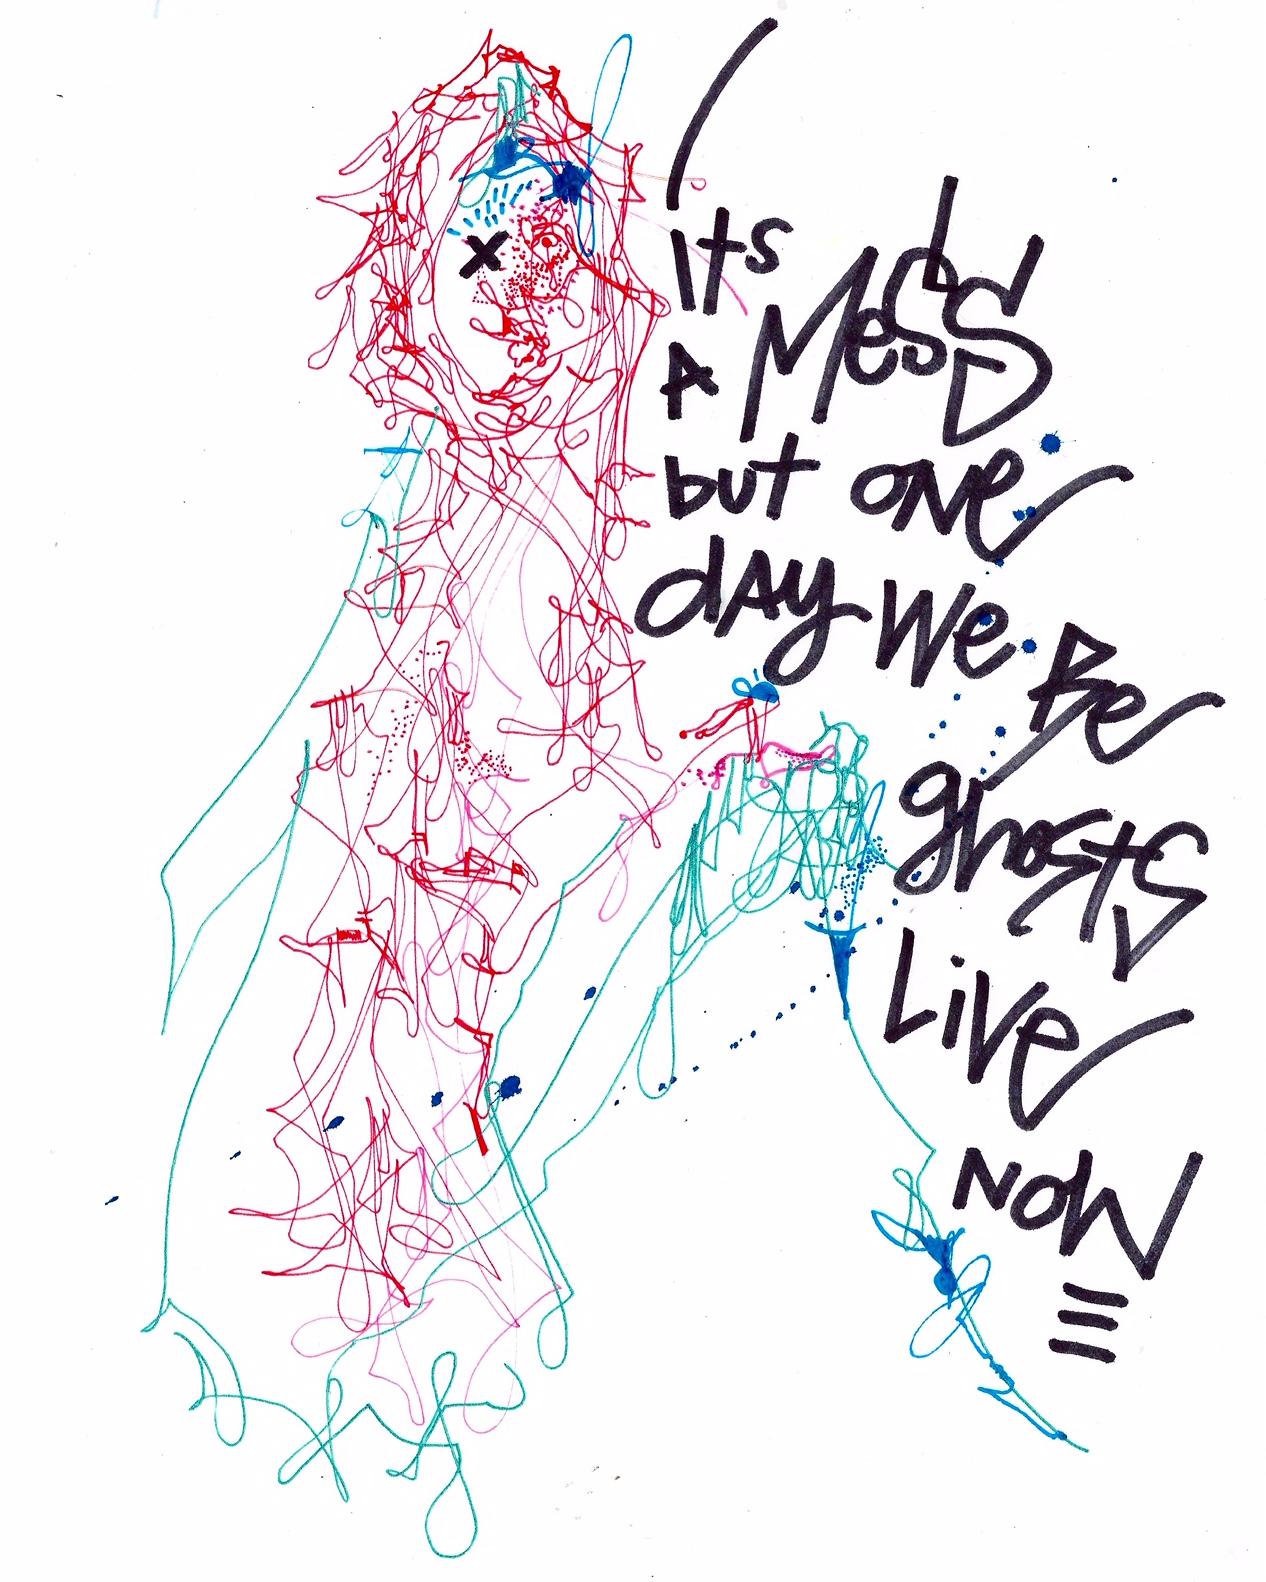 American Contemporary Art by M. Alan -It’s a Mess but One Day W'll all be Ghosts